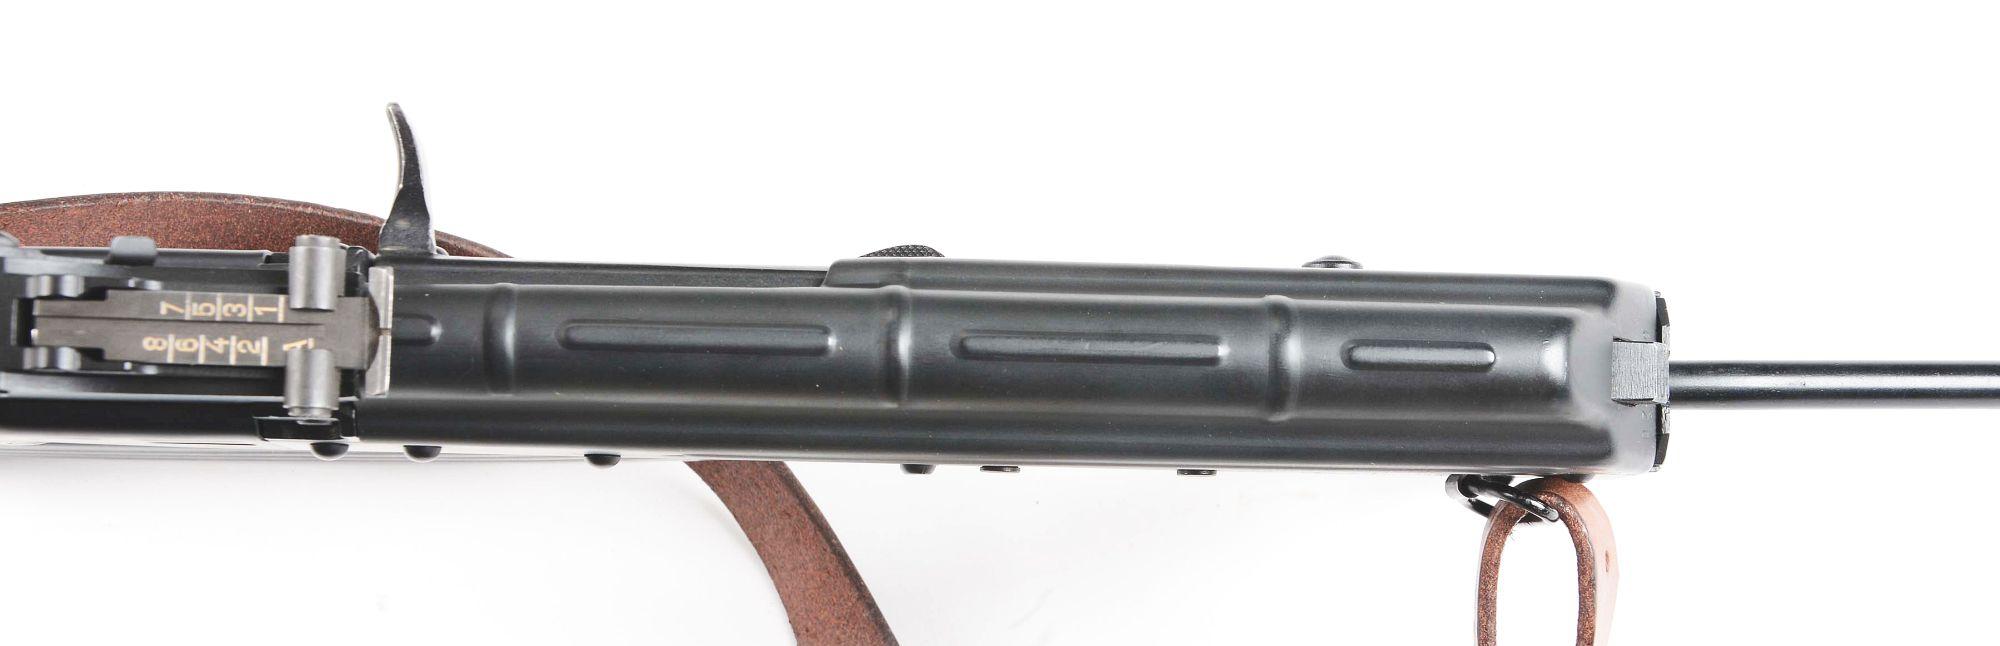 (N) Compact ITM Arms Co “Peter Fleis” Converted MK-99 (AK-47 Look Alike) Semi-Automatic Short Barrel